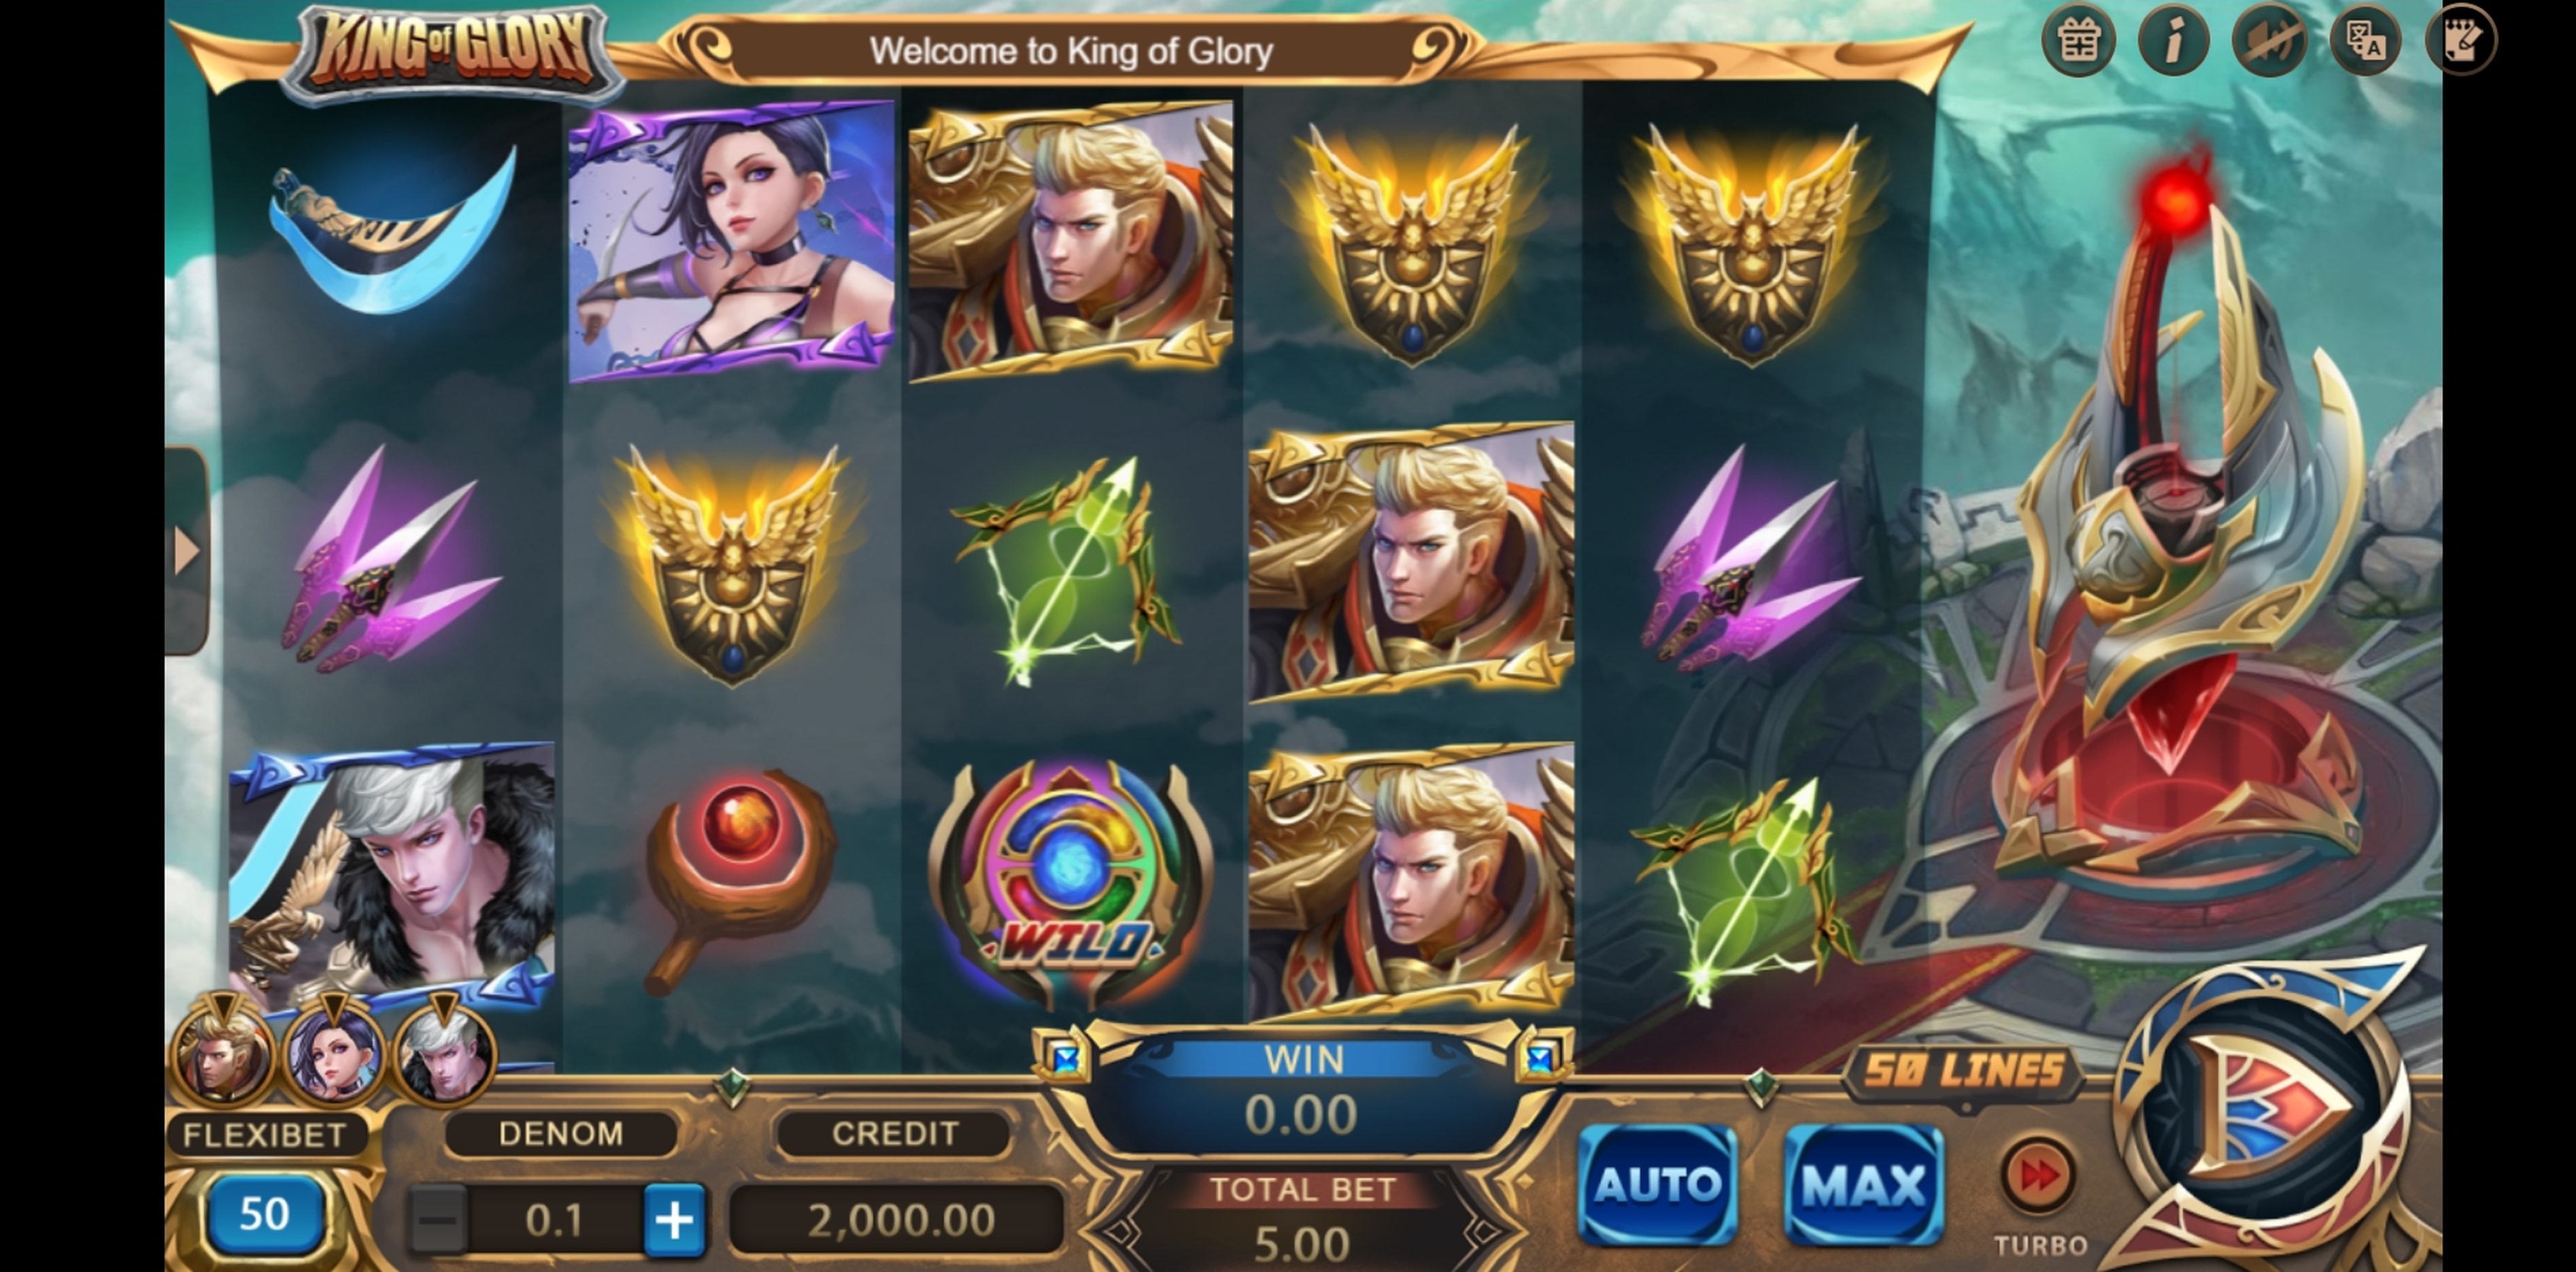 King of Glory demo play, Slot Machine Online by XIN Gaming Review | CasinosAnalyzer.com